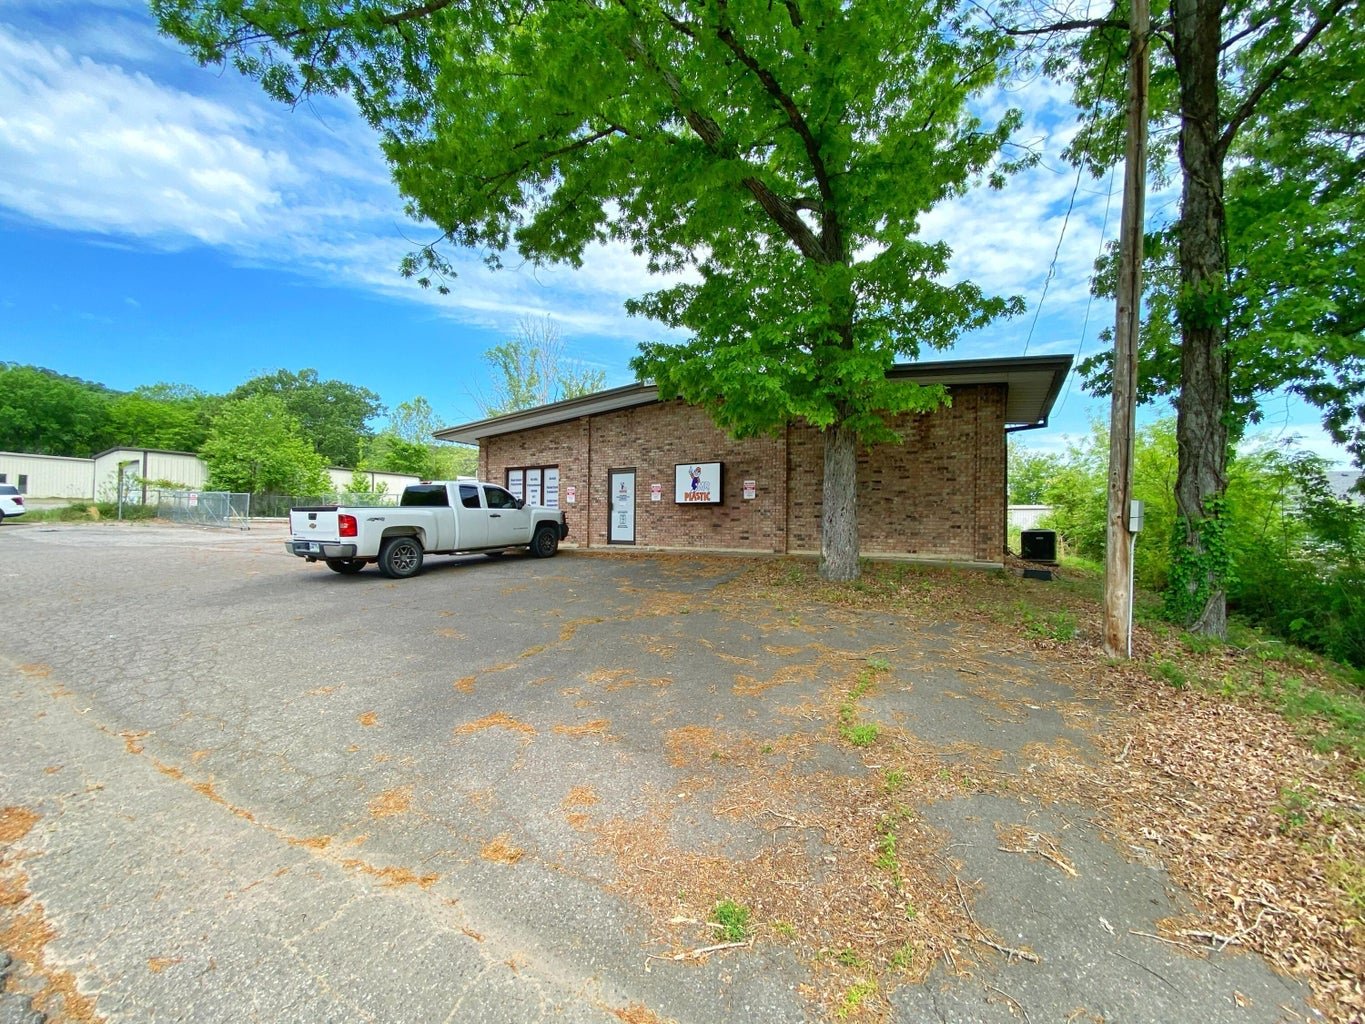 Seeking the perfect spot to grow your business? 👀🗃️ 

Explore this versatile gem of commercial real estate! Positioned strategically, it seamlessly combines office functionality with warehouse convenience. Boasting a total of 5850 sq ft, including 